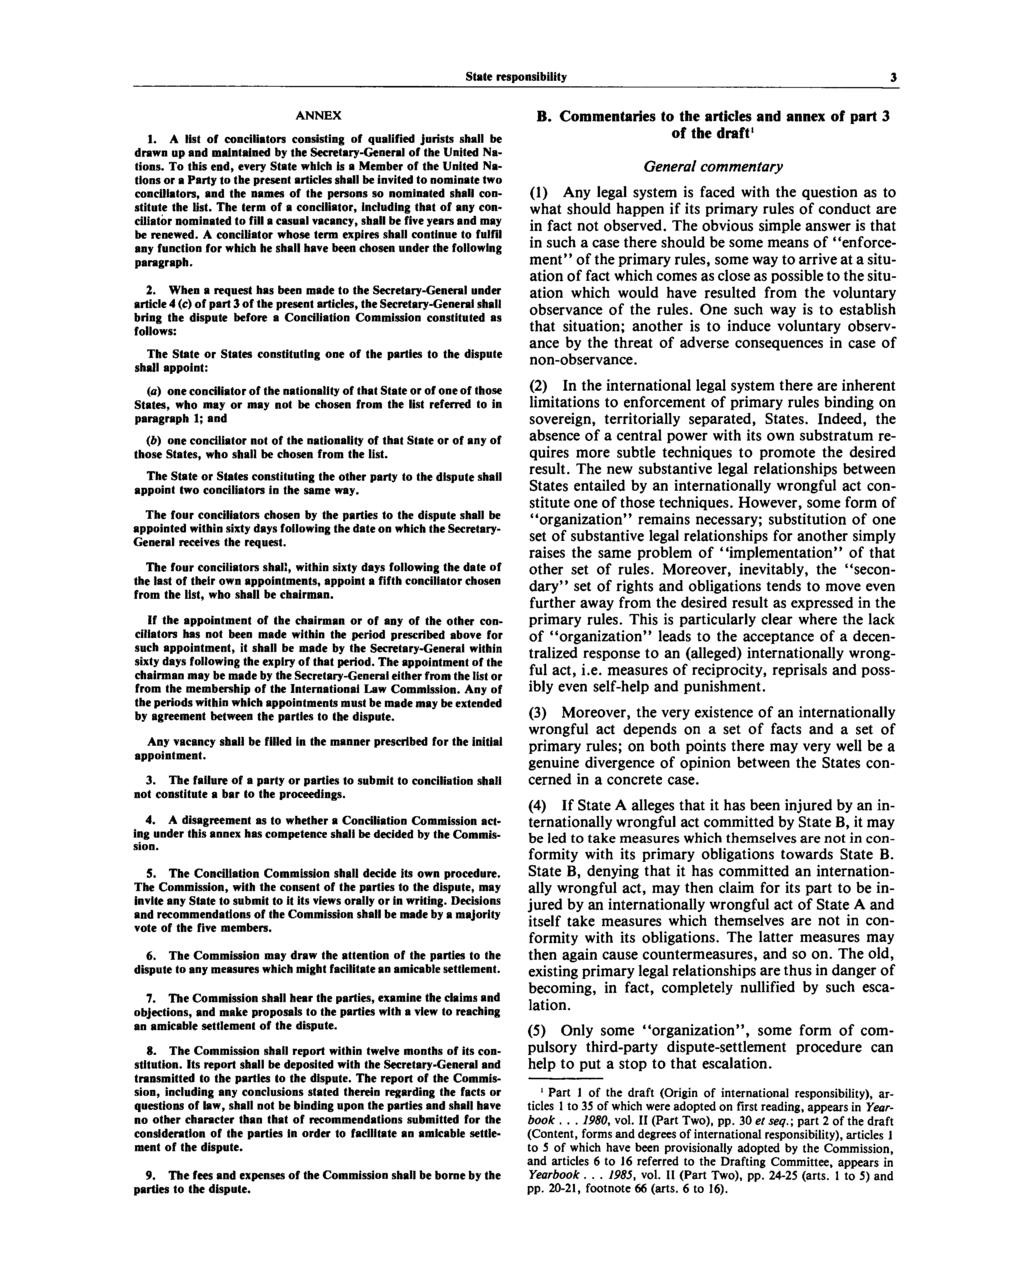 State responsibility ANNEX 1. A list of conciliators consisting of qualified jurists shall be drawn up and maintained by the Secretary-General of the United Nations.